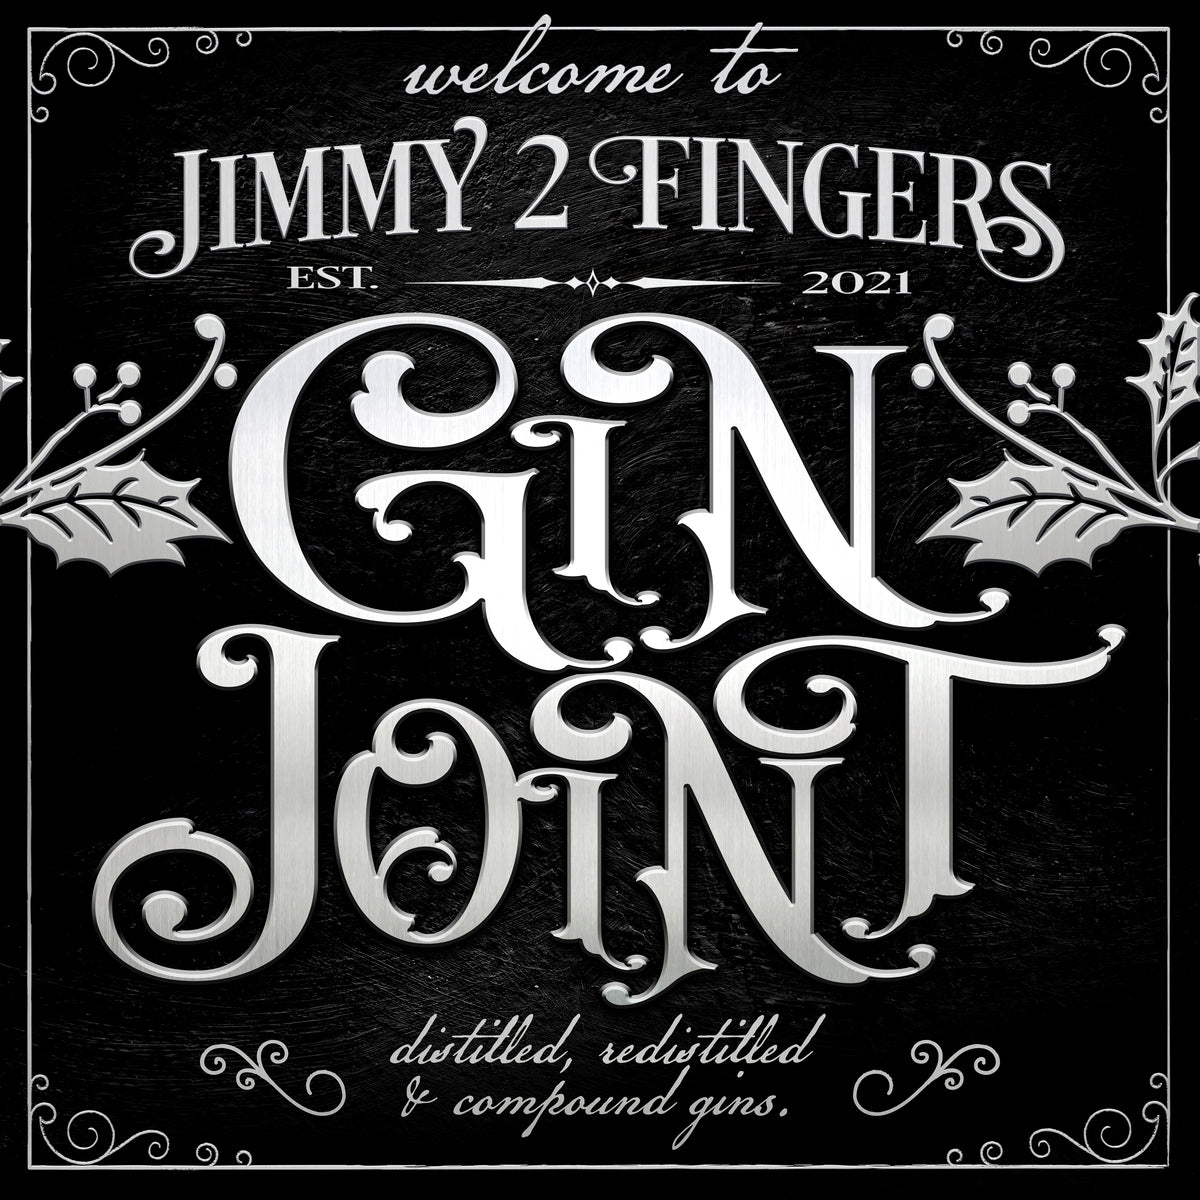 speakeasy Gin Joint sign personalized with family name.